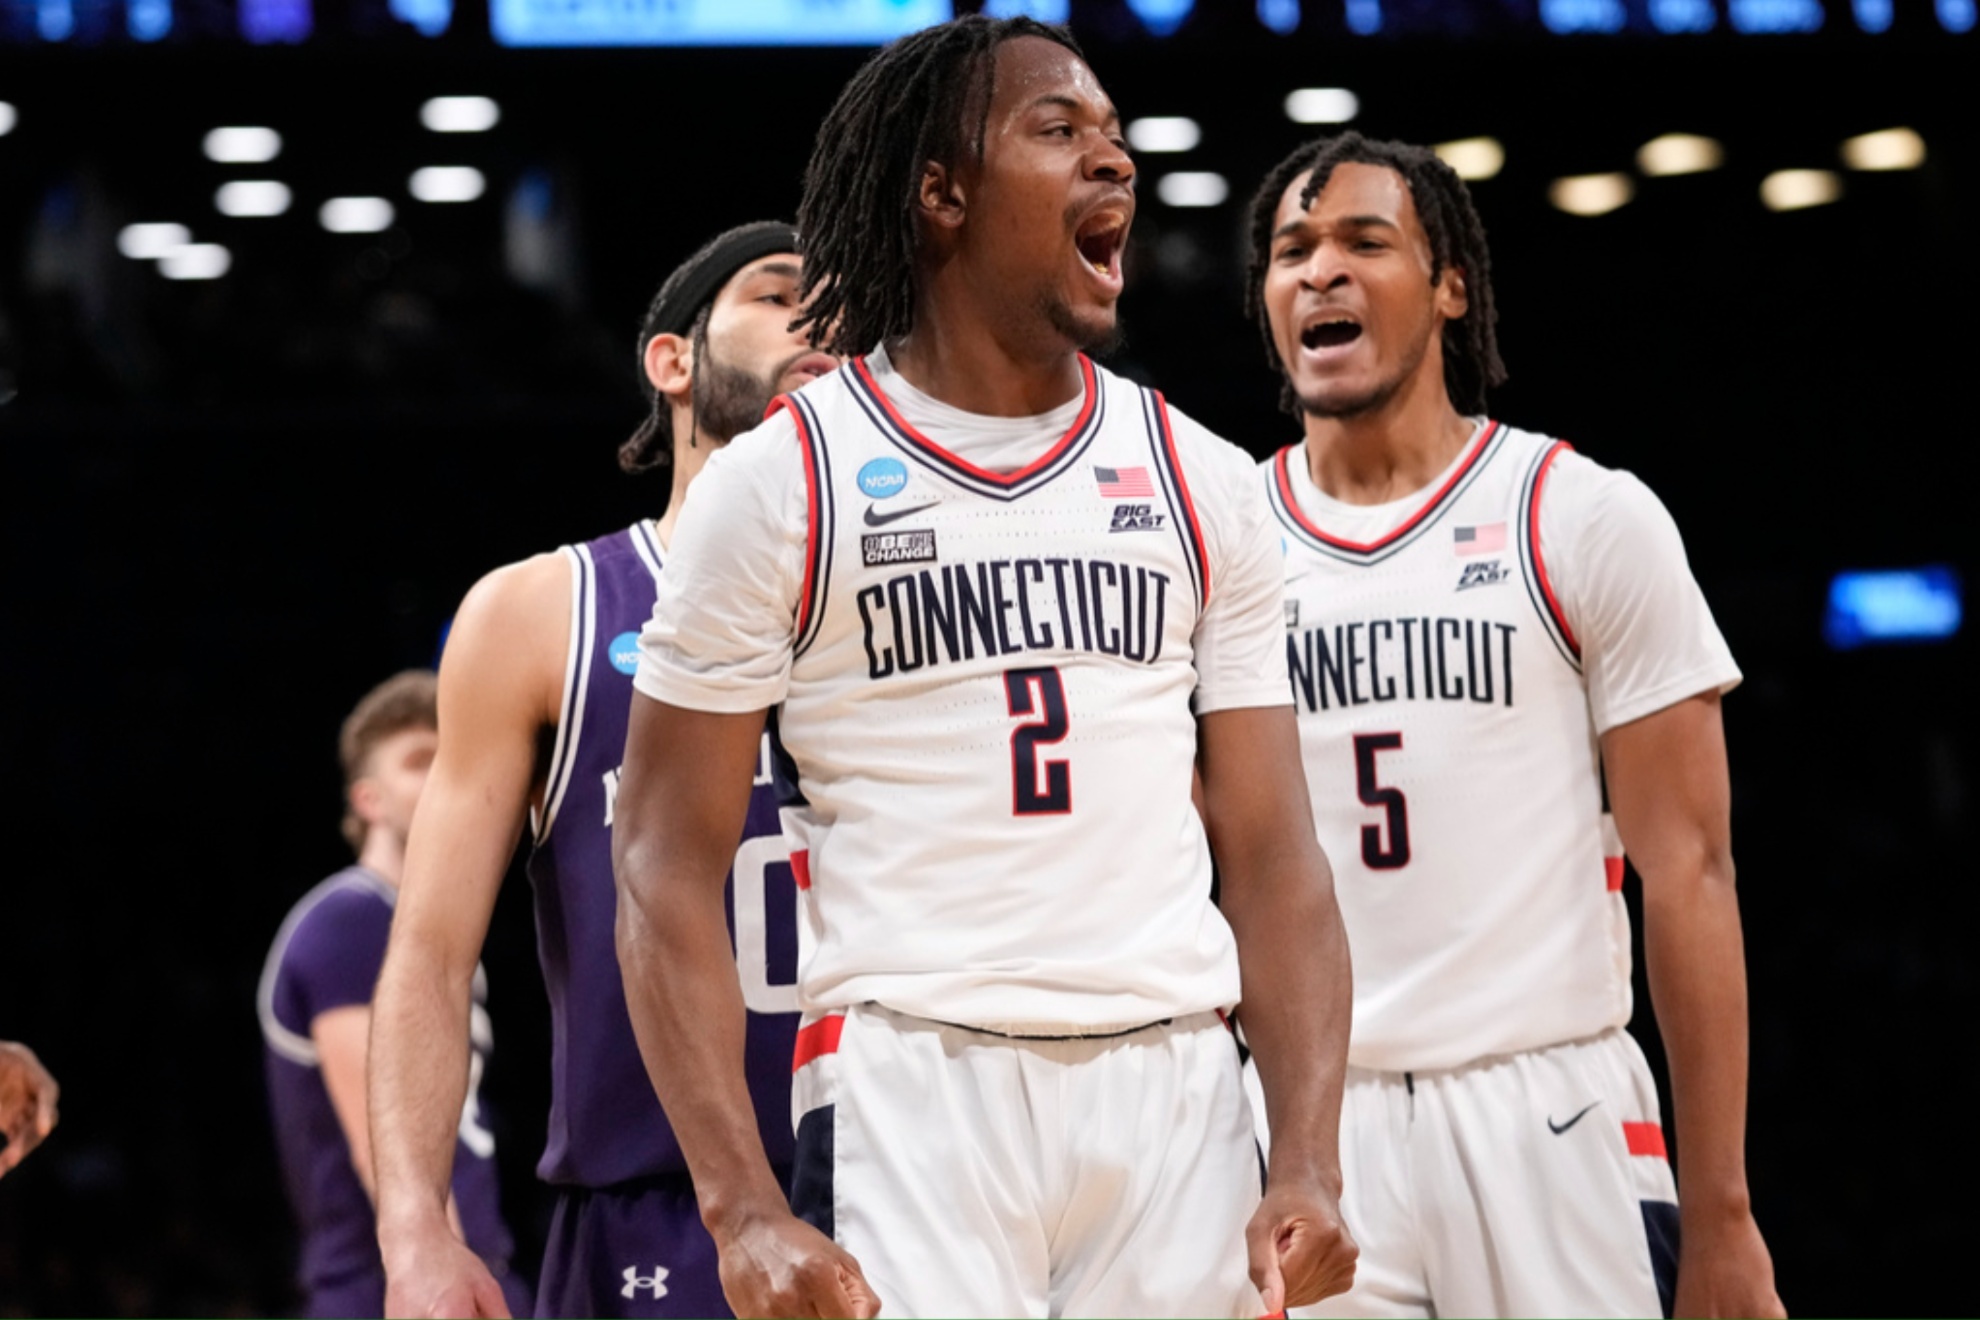 The UConn Huskies are looking for back-to-back NCAA Championships